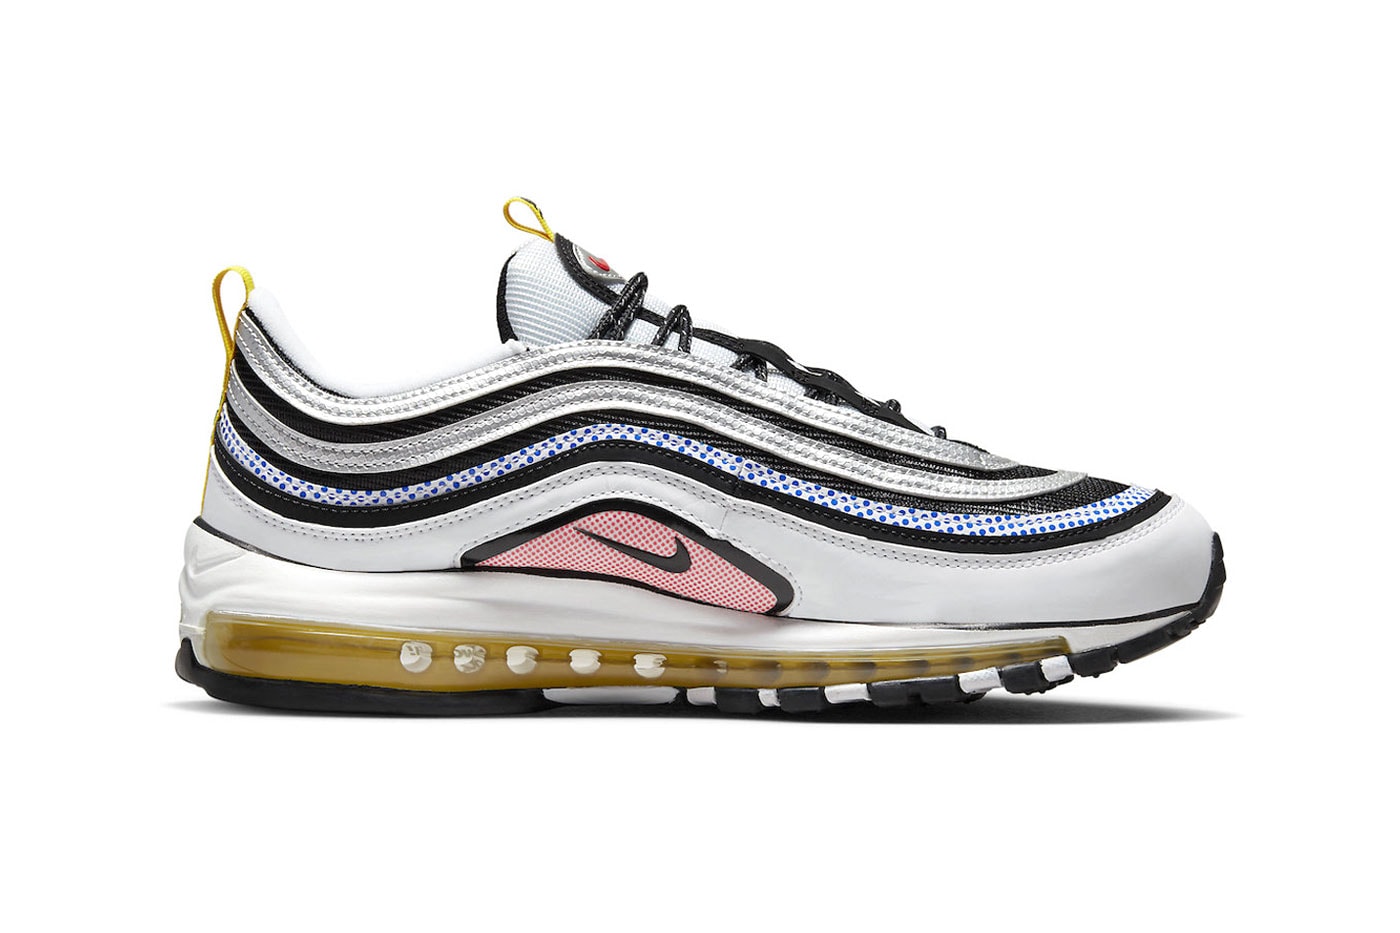 Nike Air Max 97 mighty swooshers DX6057 001 white black blue red july 1 2022 170 usd price date info 